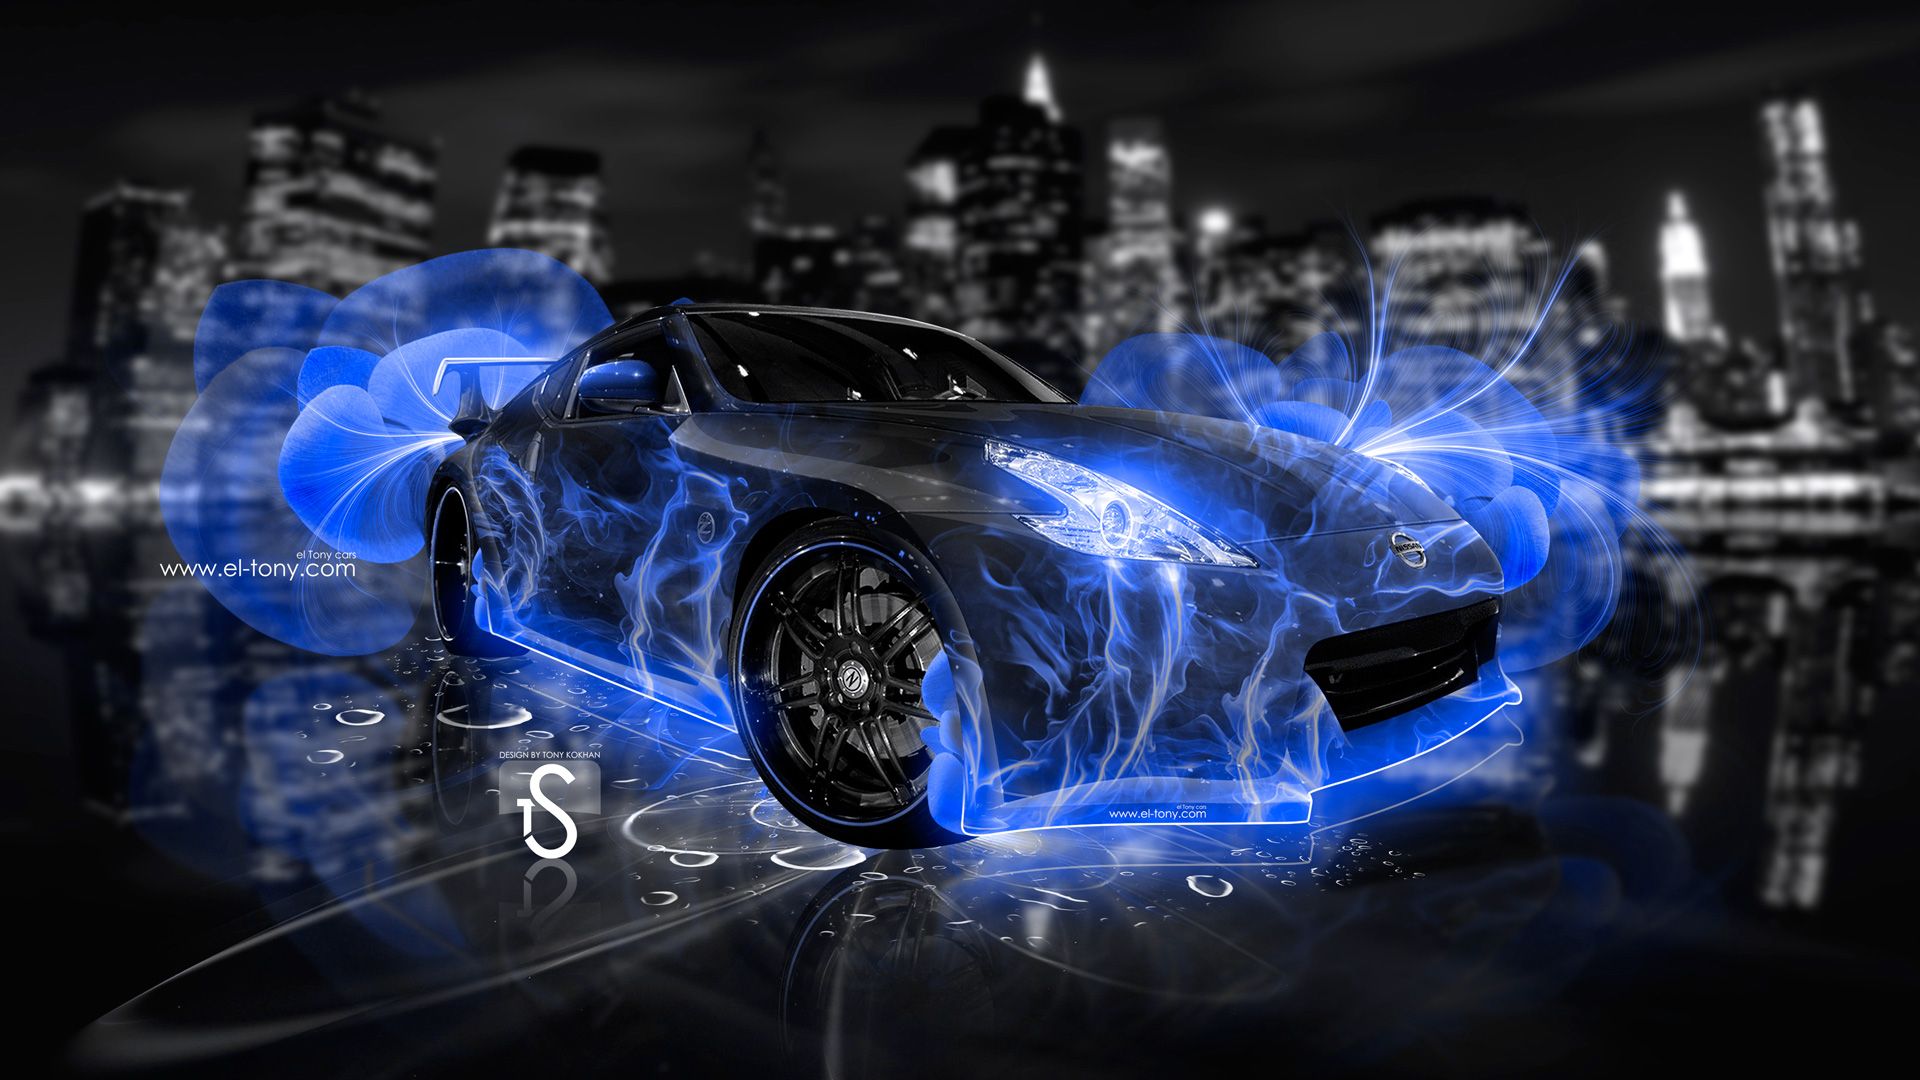 Neon Blue Car Wallpapers